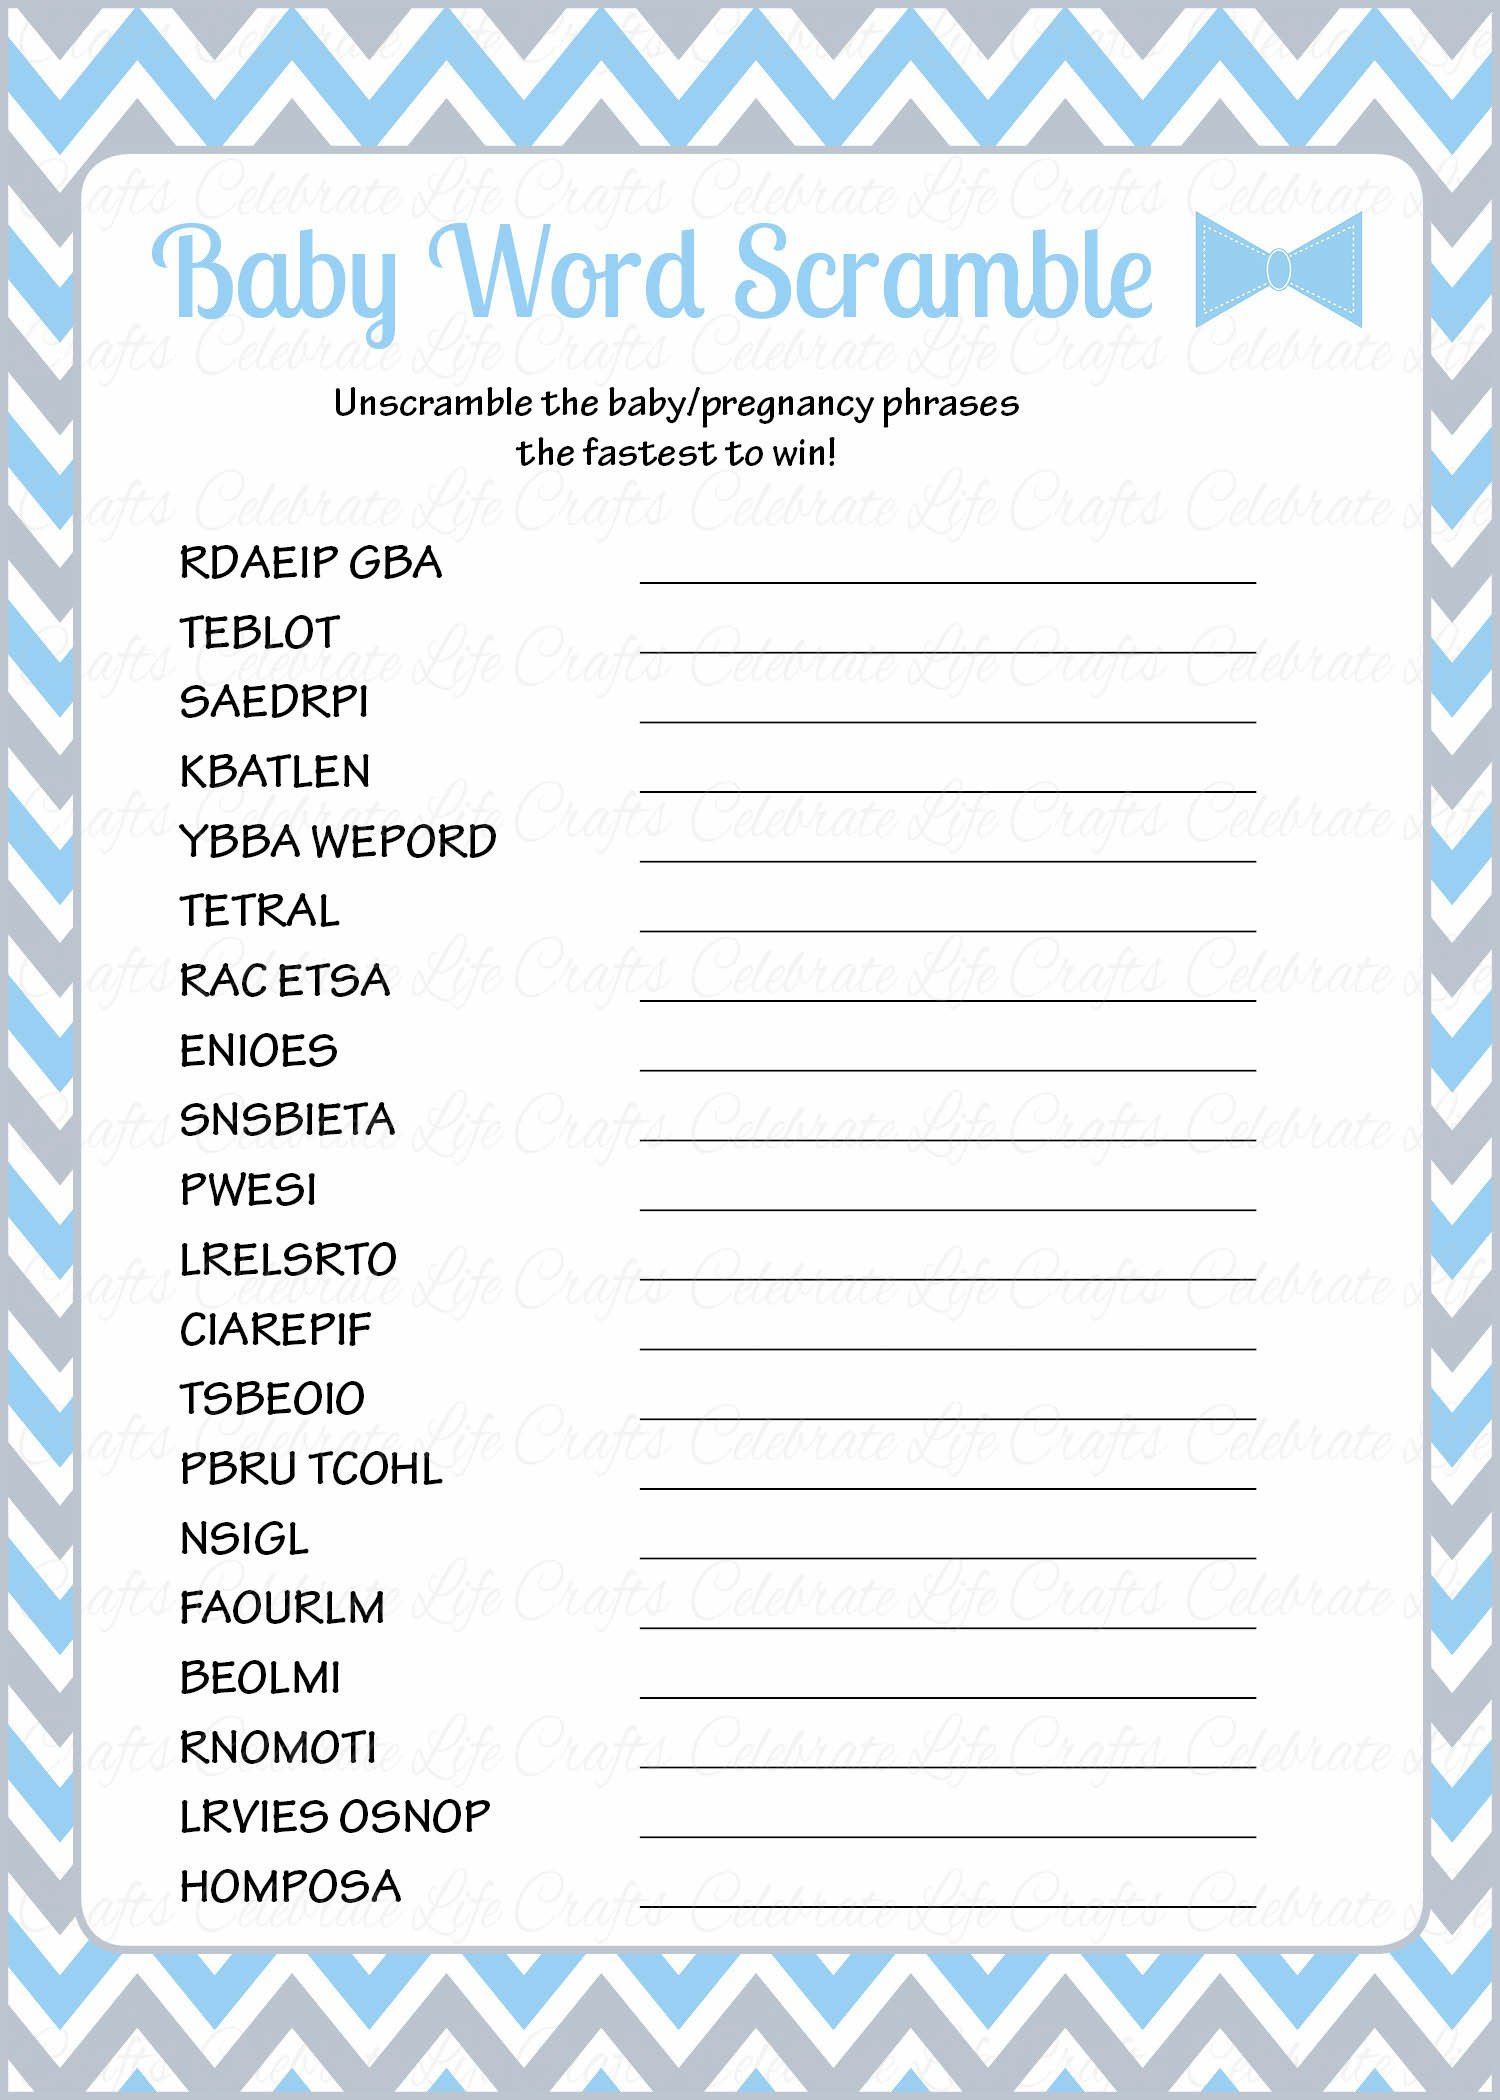 36 Adorable Baby Shower Word Scrambles | Kittybabylove